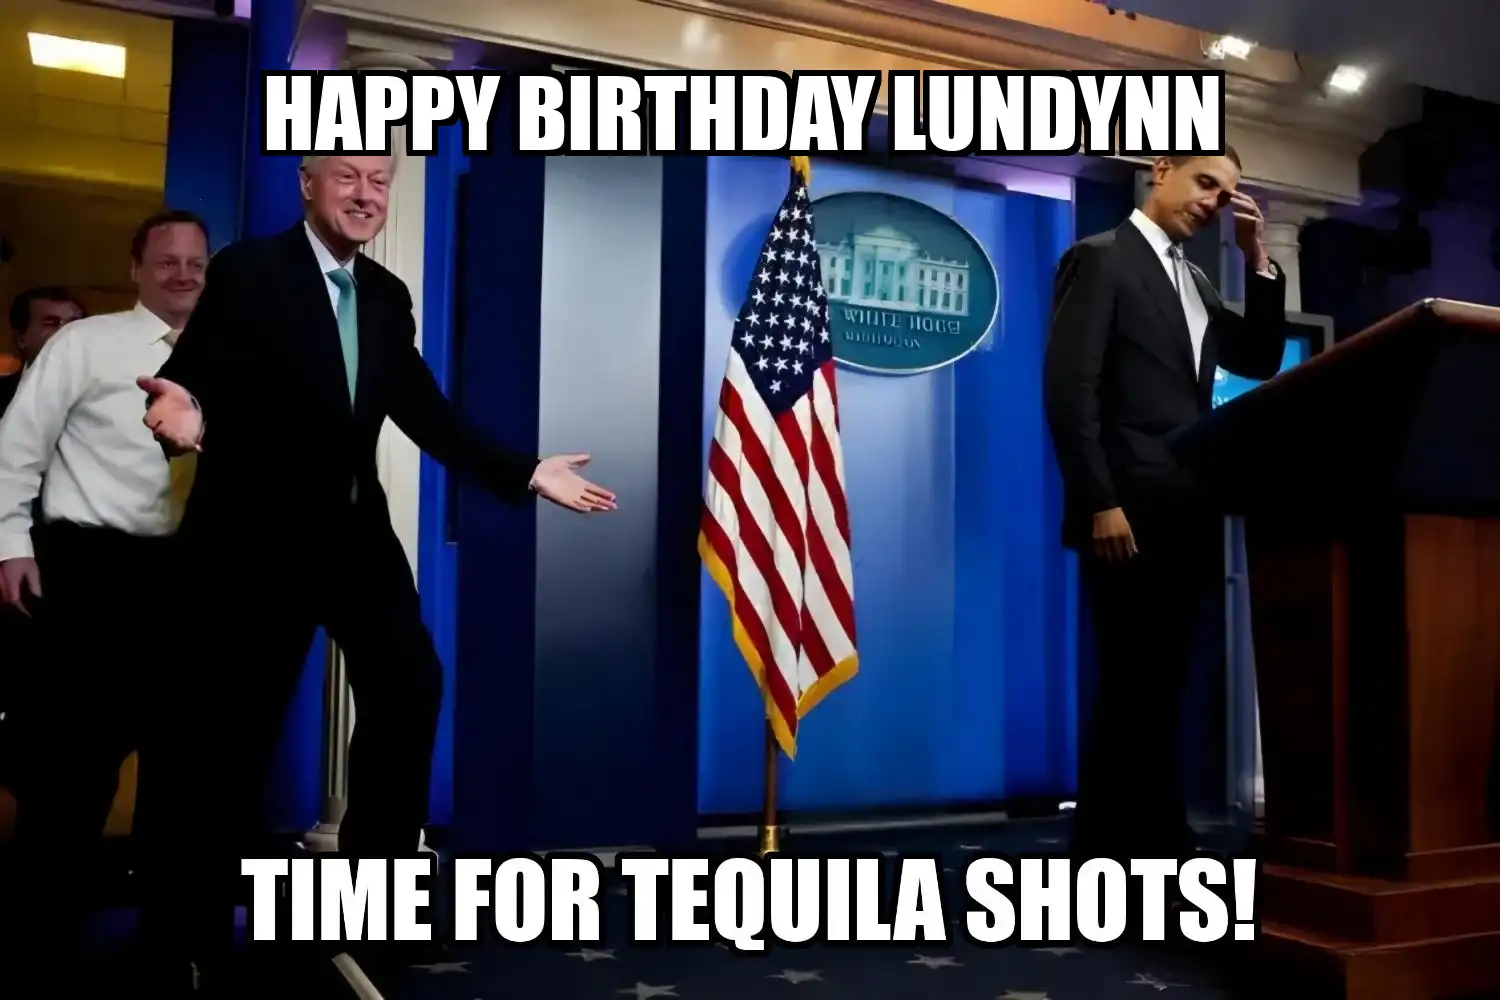 Happy Birthday Lundynn Time For Tequila Shots Memes